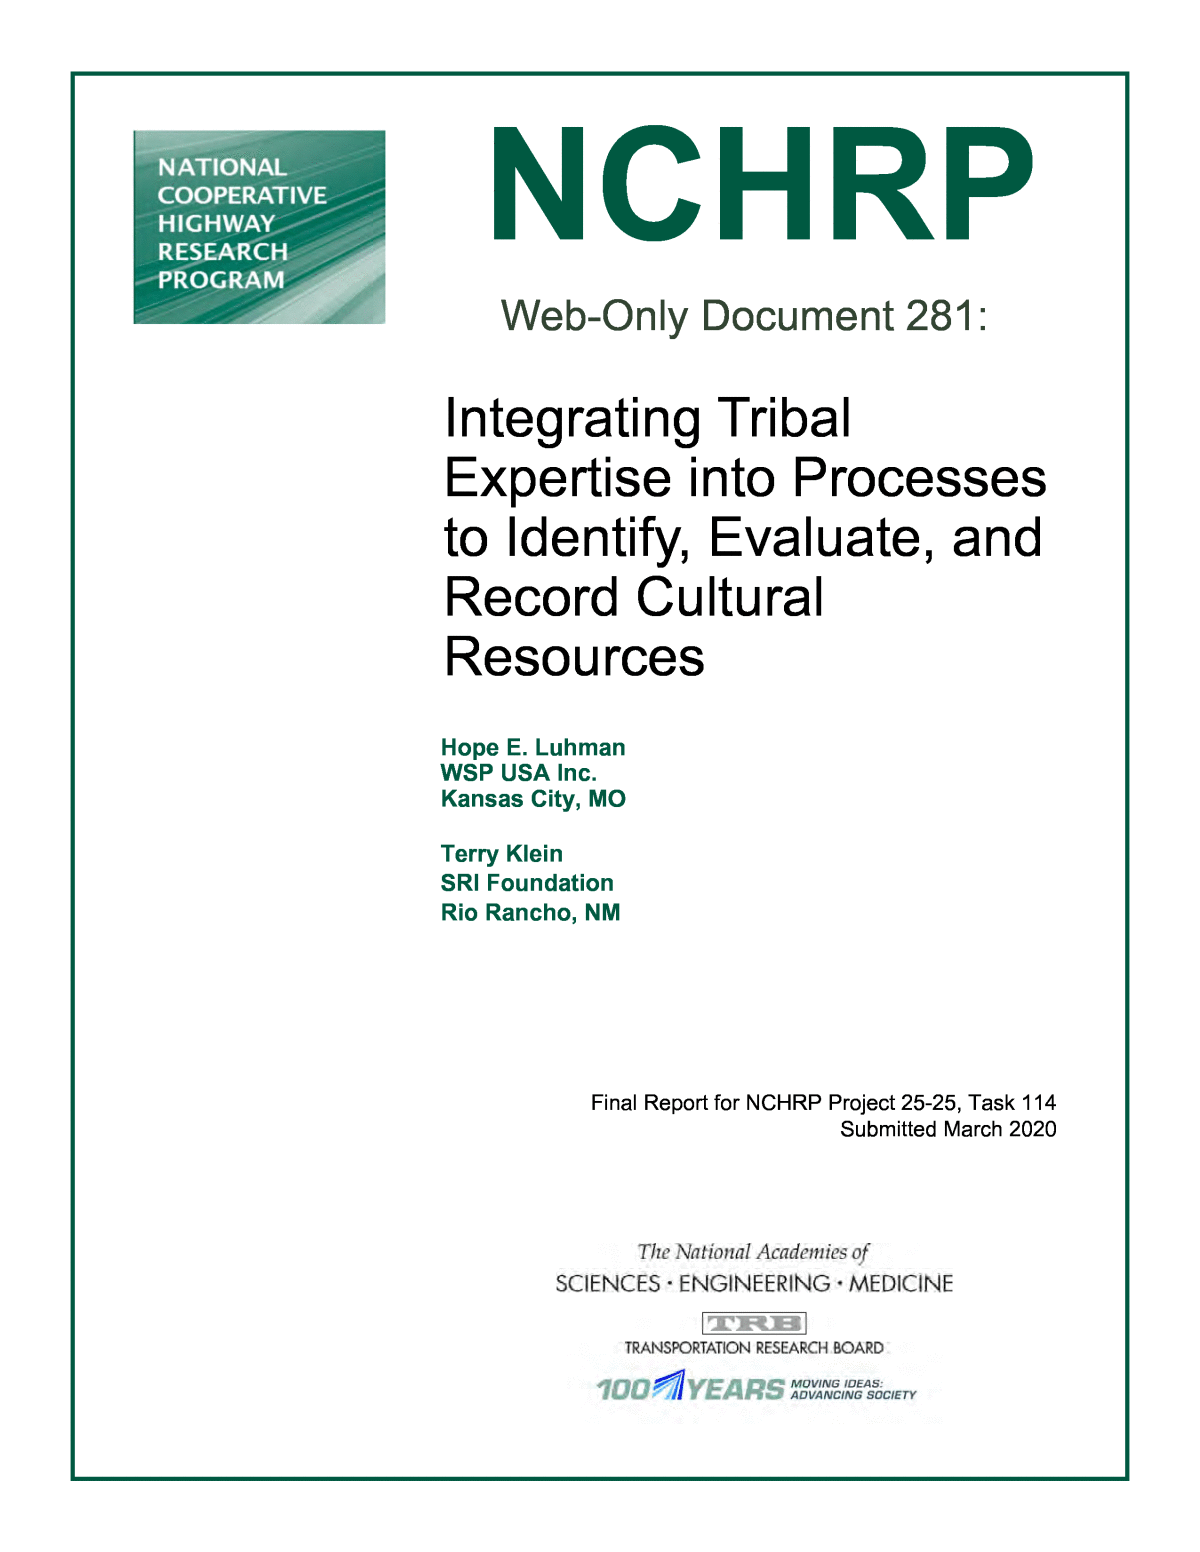 Tribal Resources